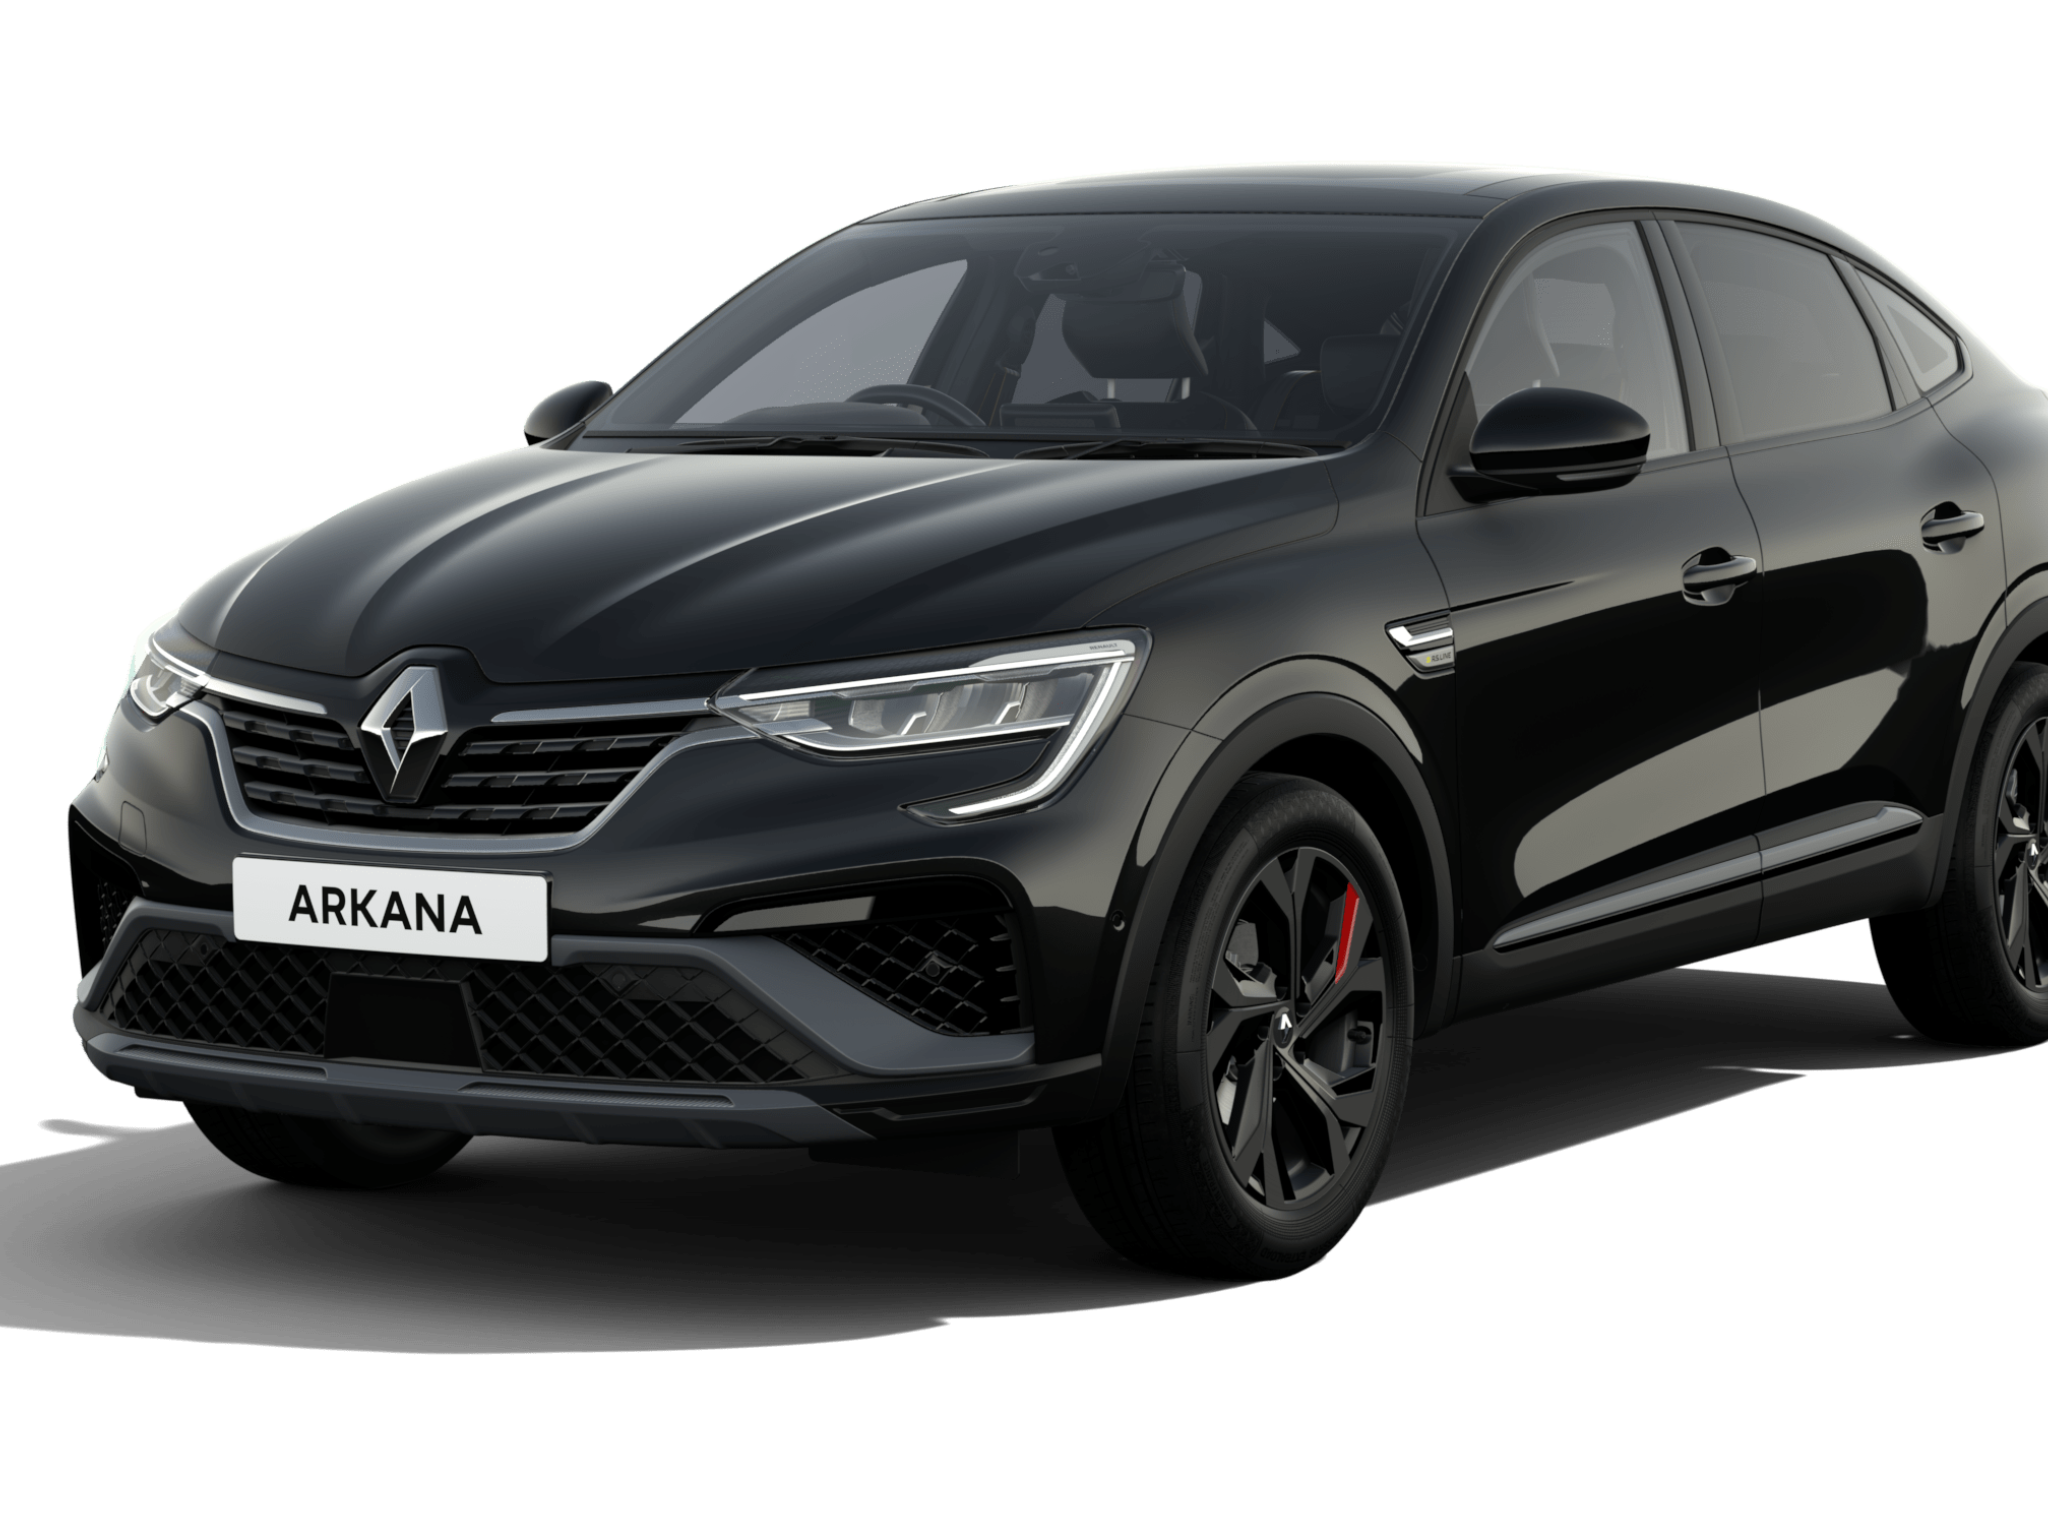 2022 Renault Arkana Australian pricing and features revealed